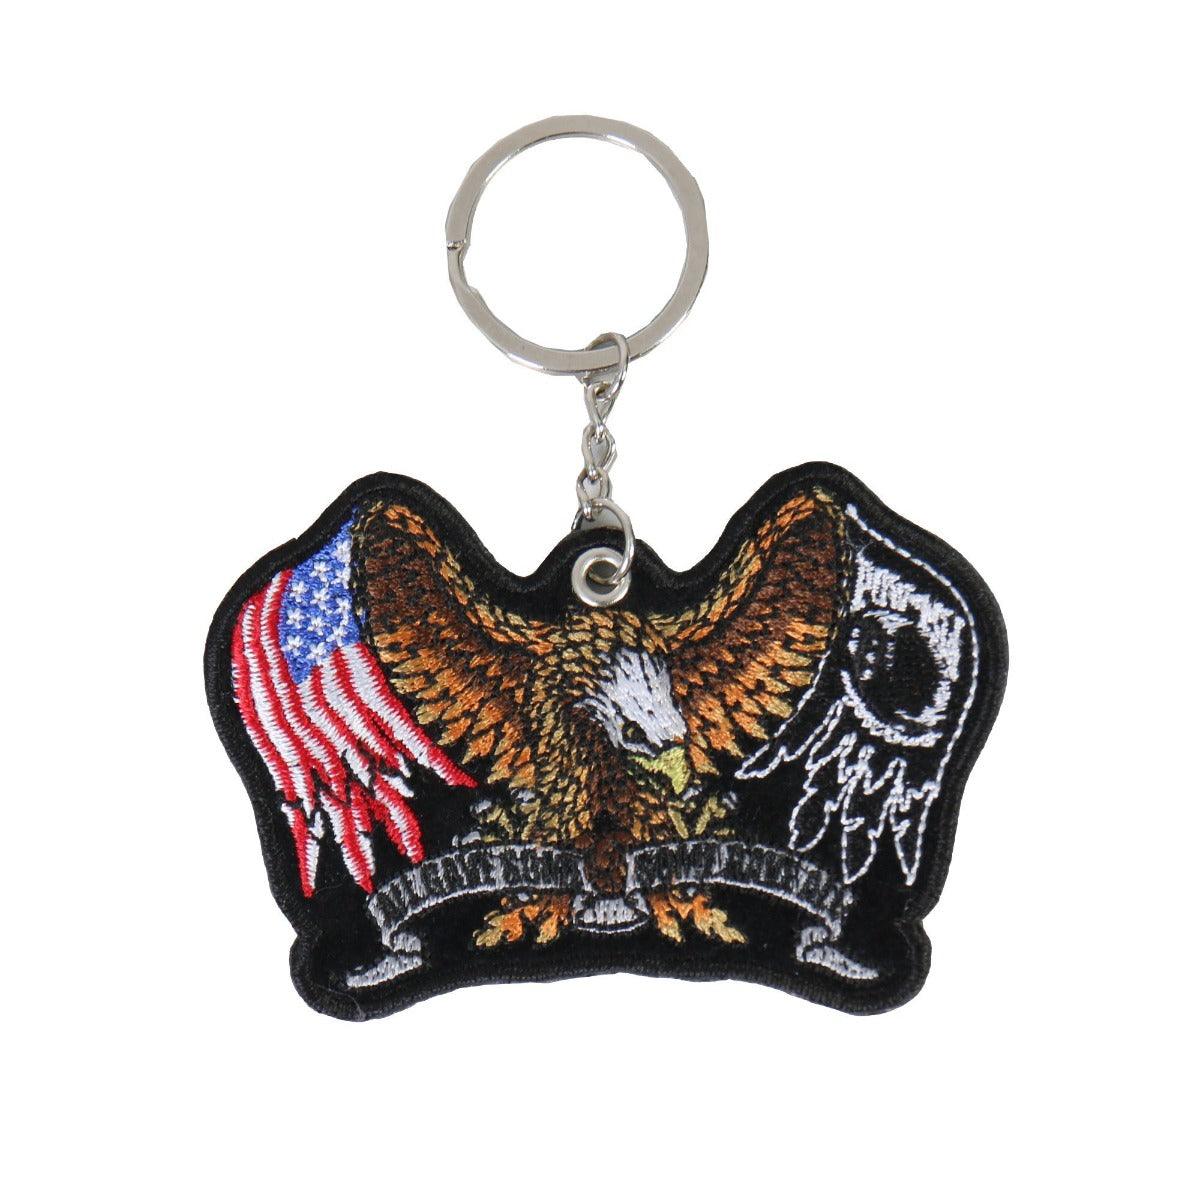 Hot Leathers All Gave Some Embroidered Key Chain - American Legend Rider